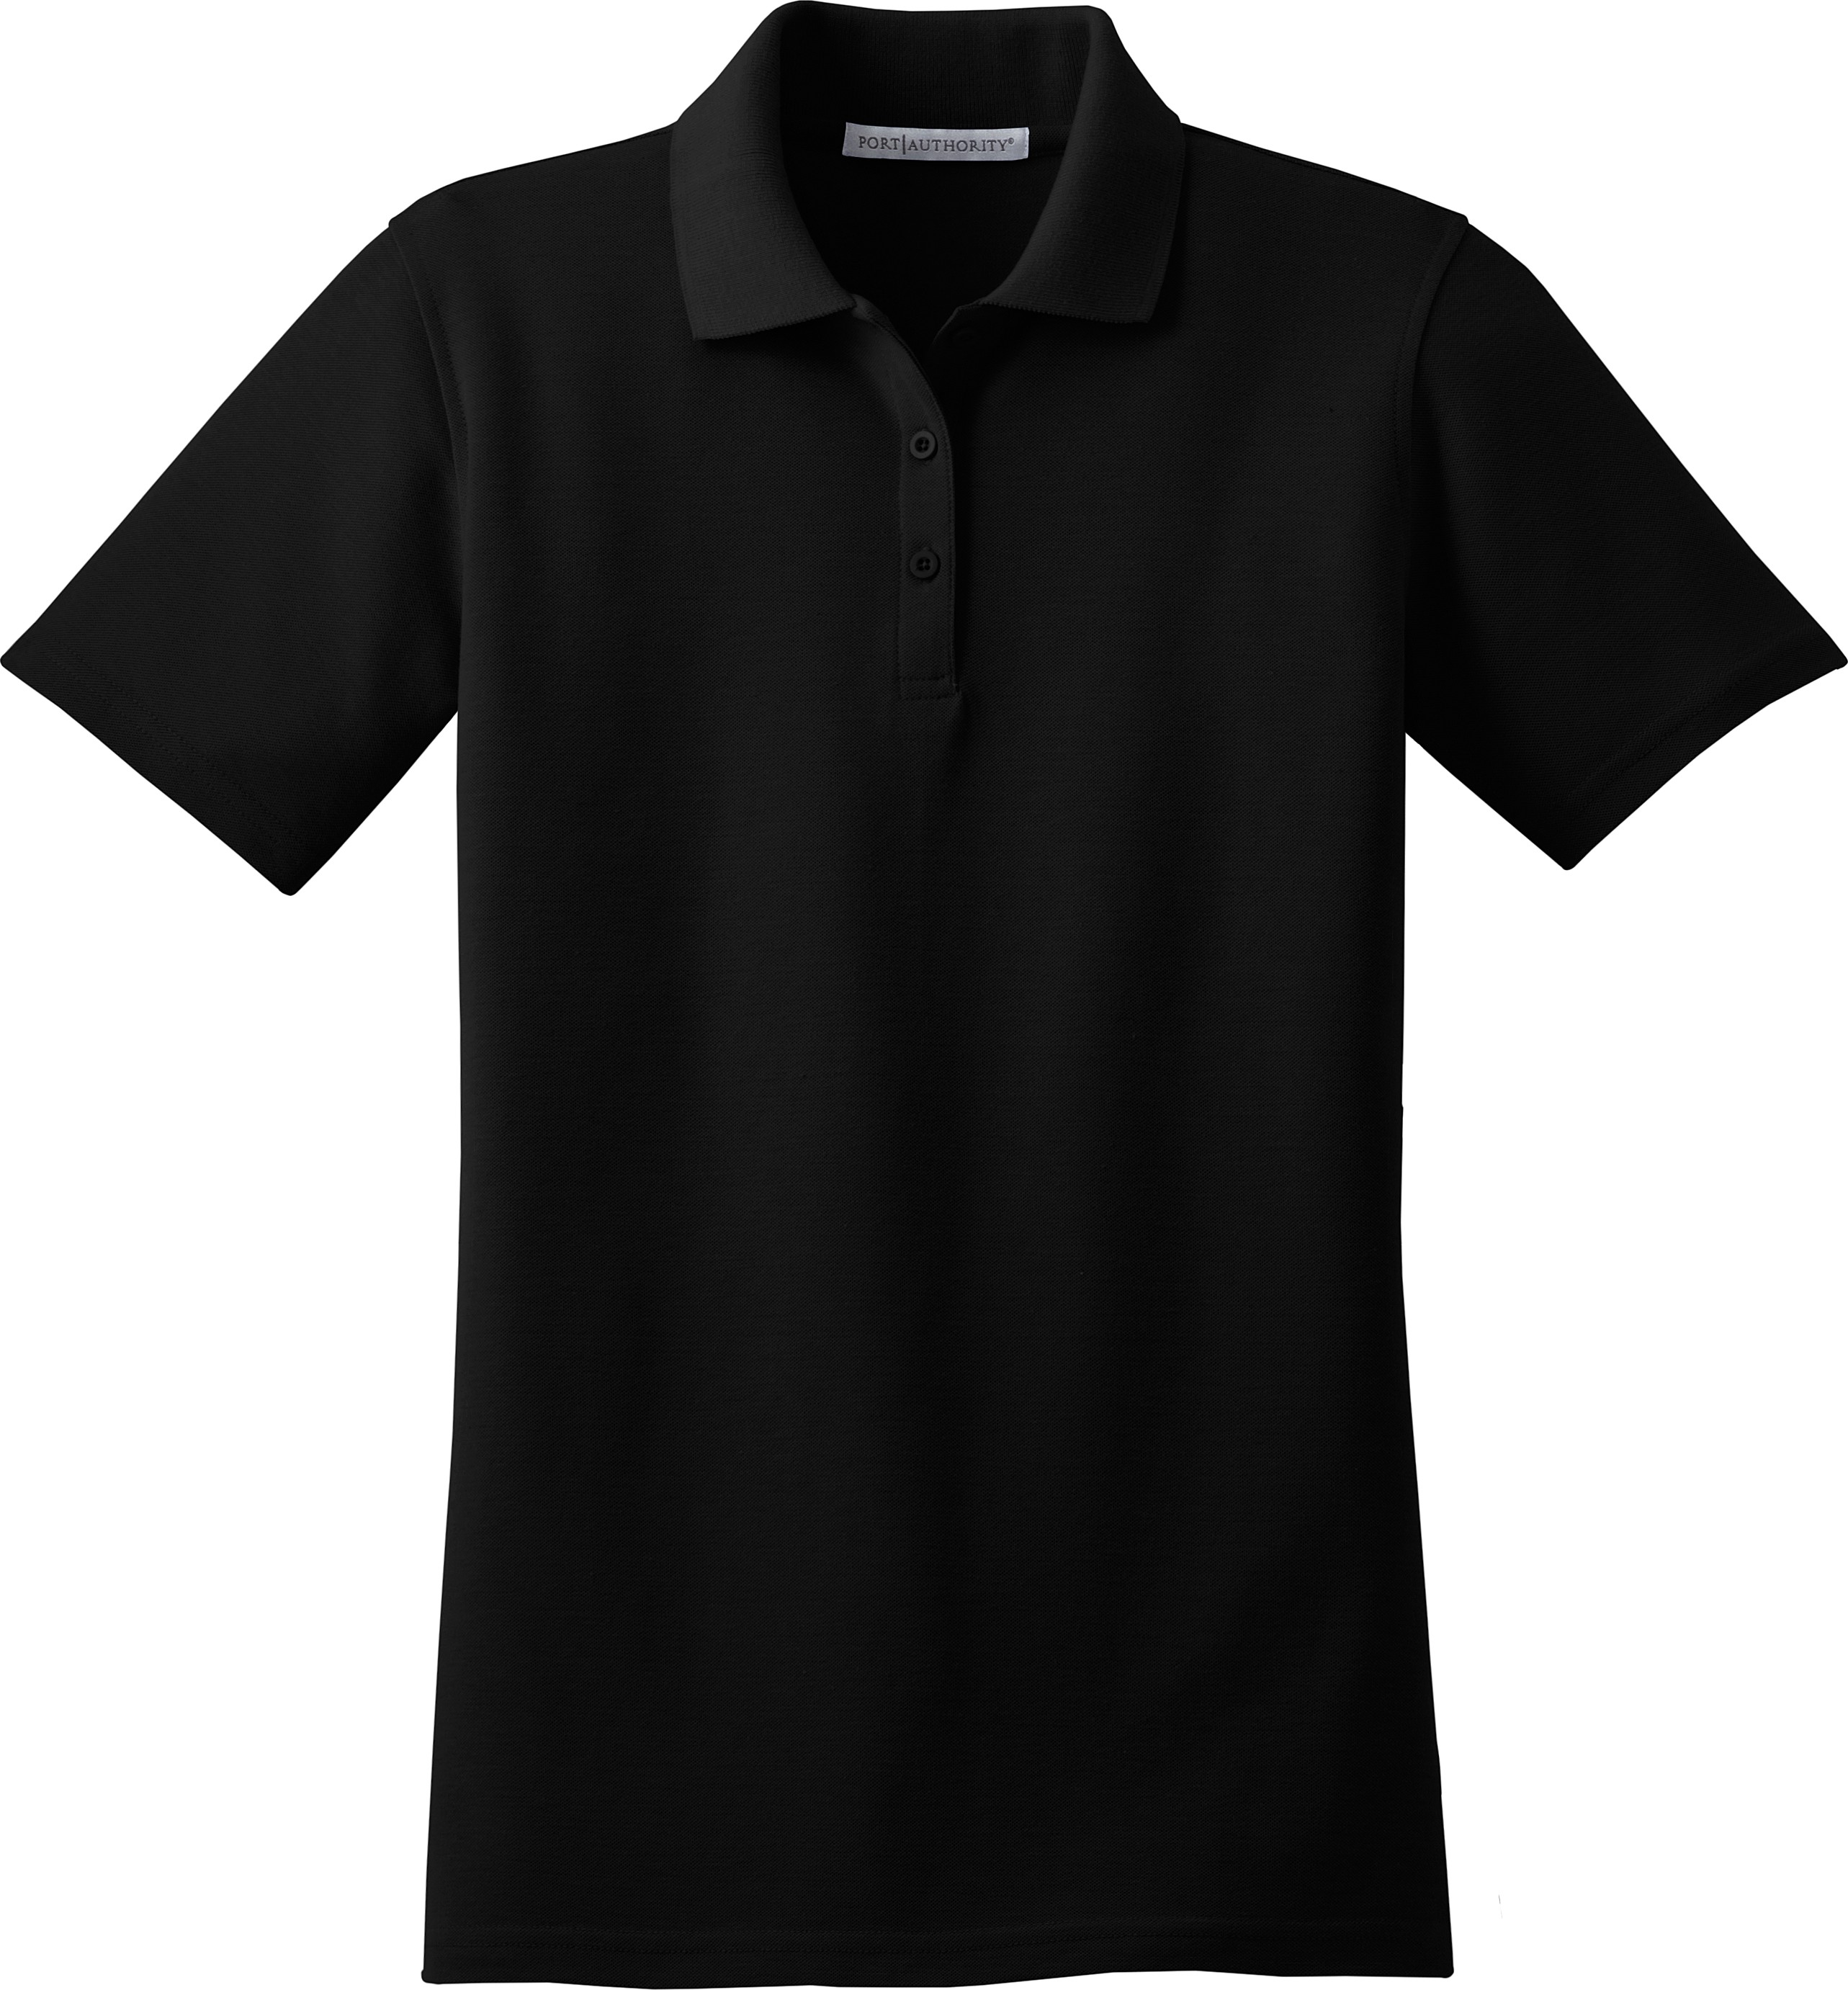 Black Polo Shirt Template - Clipart library